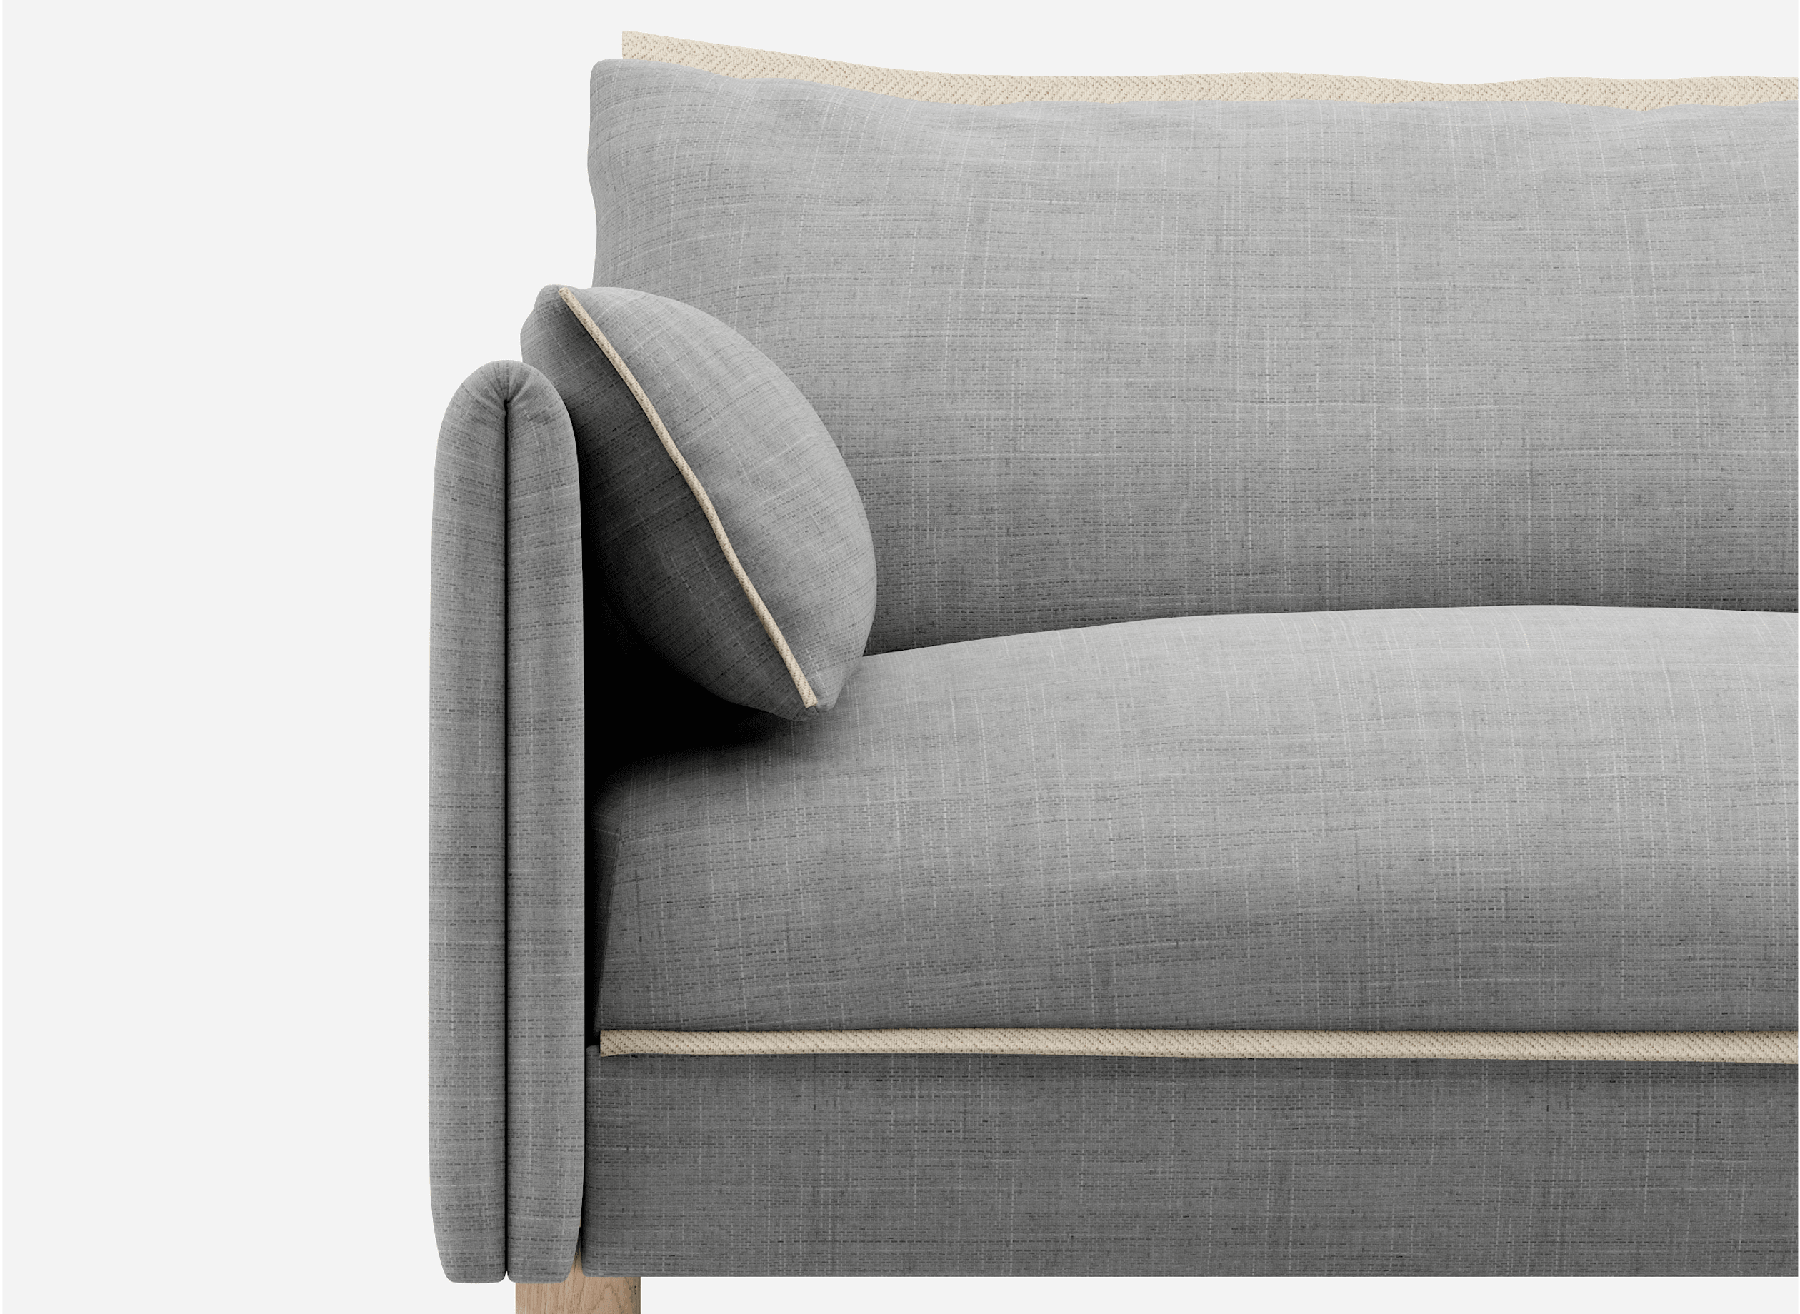 3 Seater Chaise Corner Right Hand Sofa | Weave Light Grey - Cozmo @ Light Grey Weave Jacket | Natural Trim